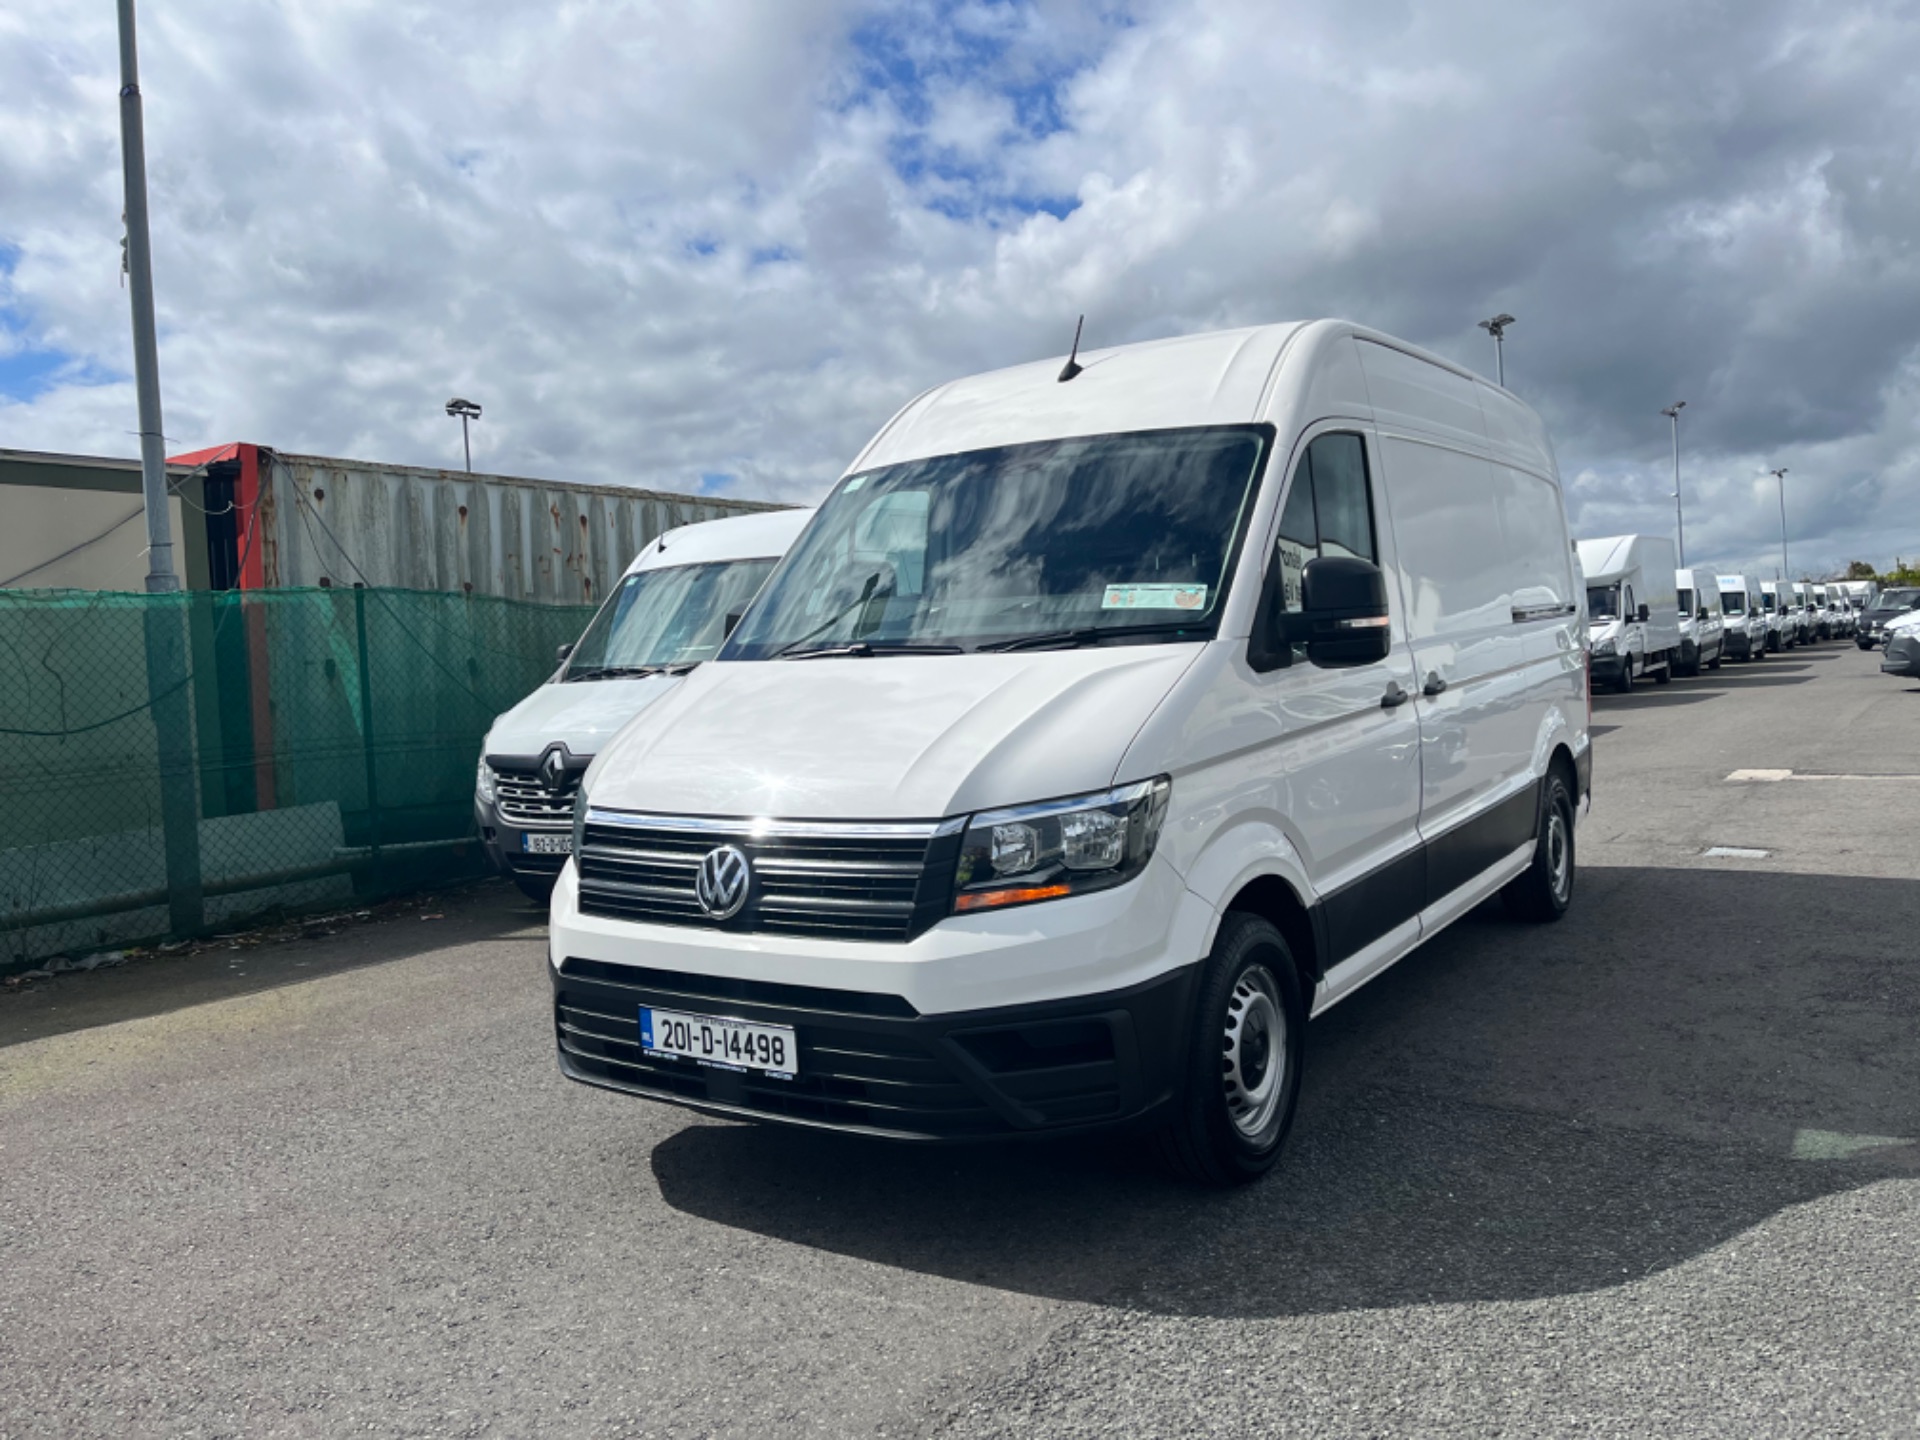 2020 Volkswagen Crafter 35 MWB 140HP M6F 5DR (201D14498) Image 2